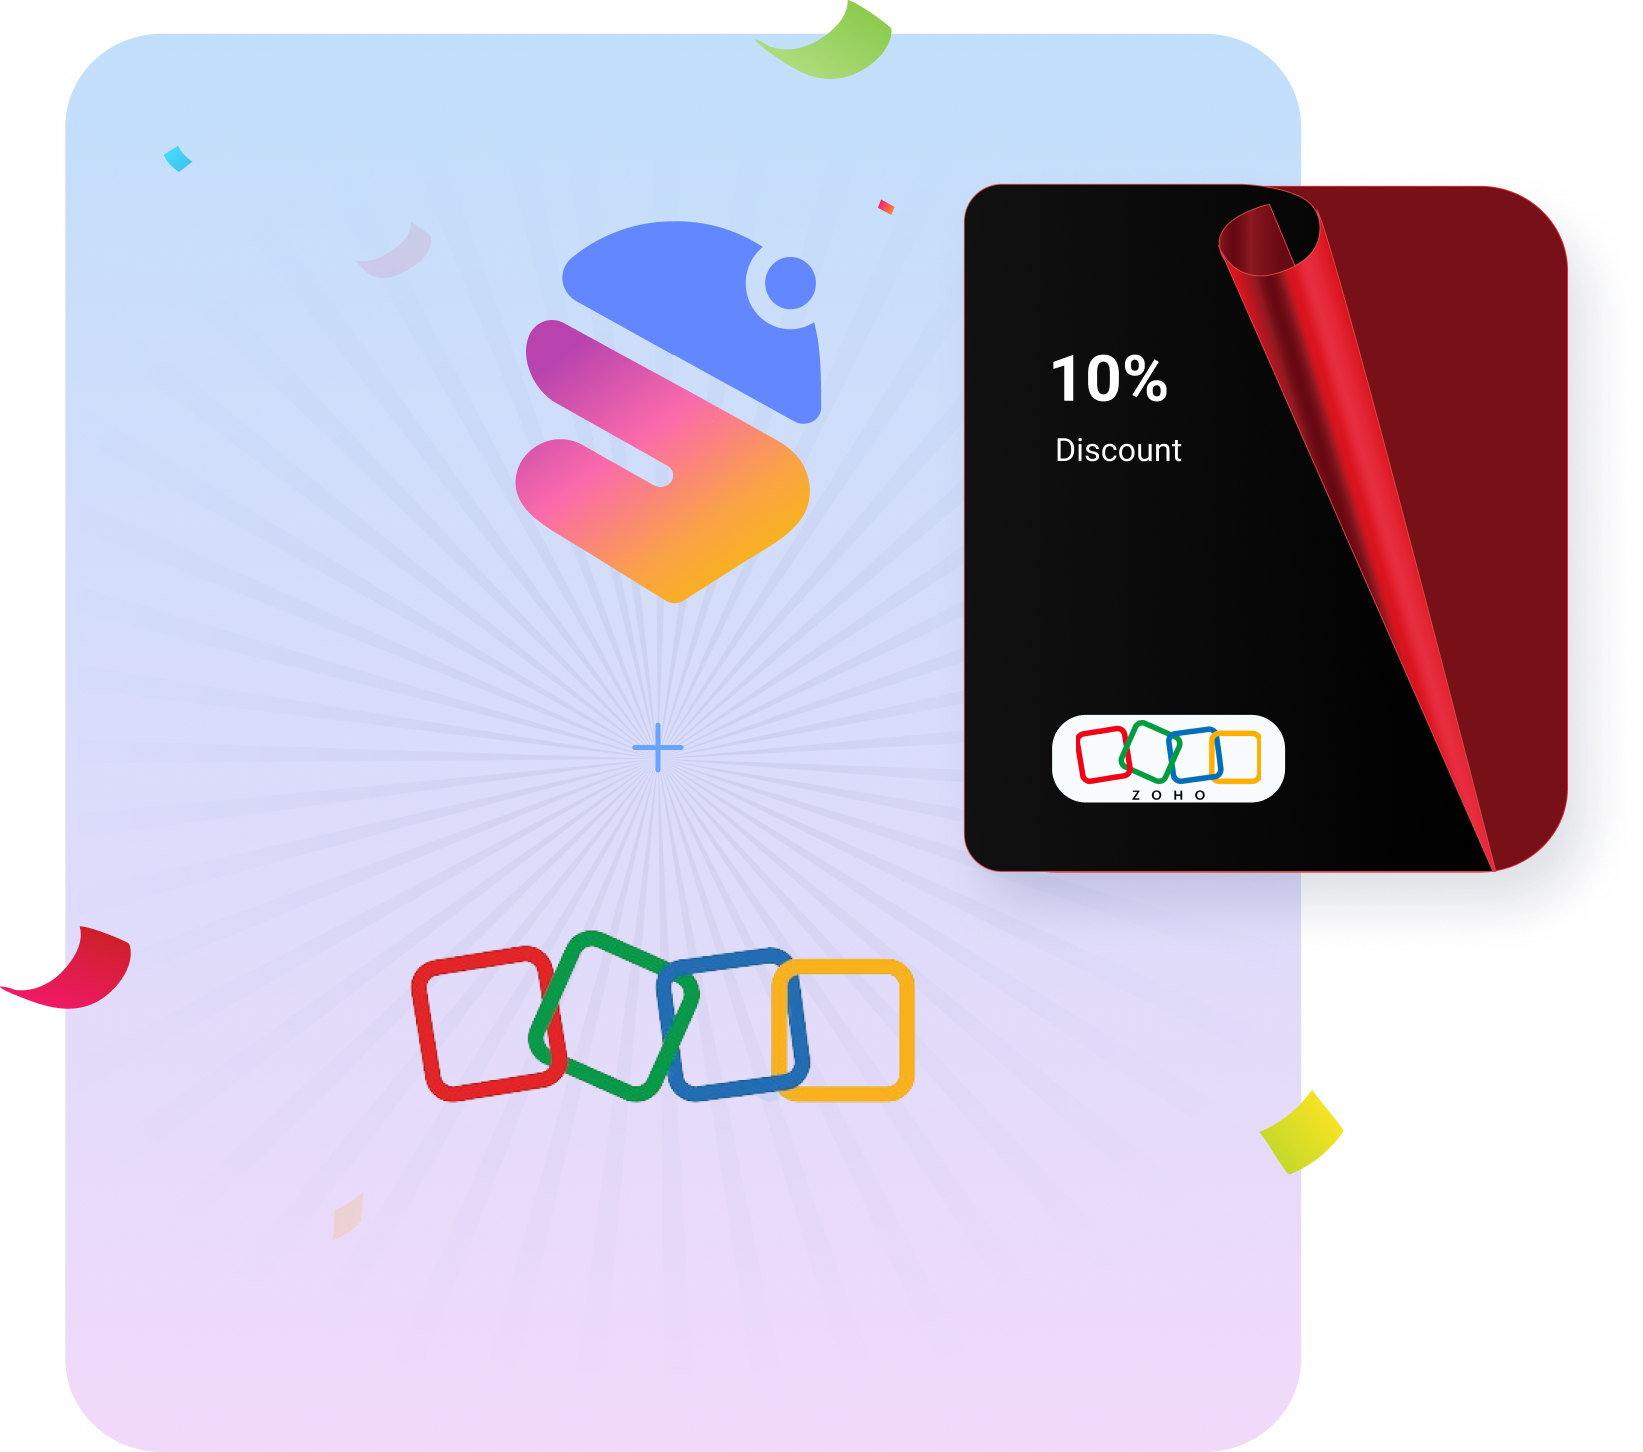 Zoho Exclusive Features